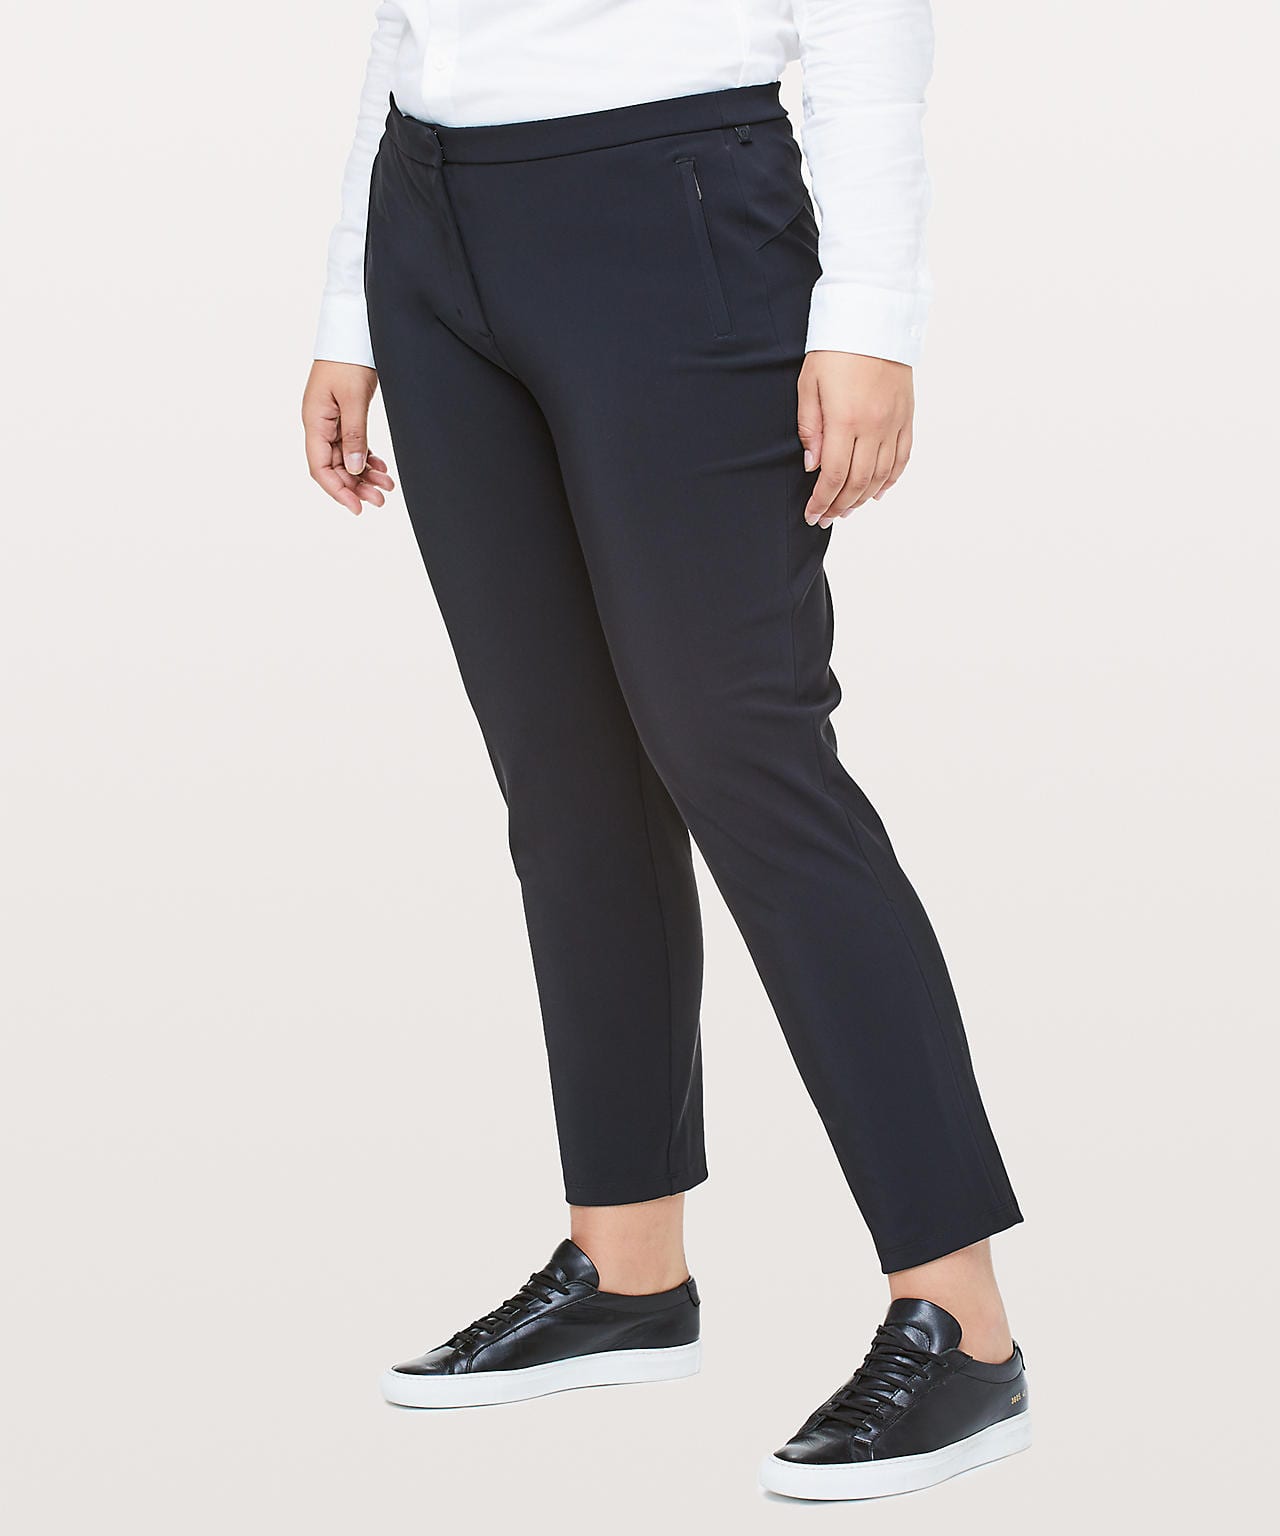 lululemon on the move pant reviewed